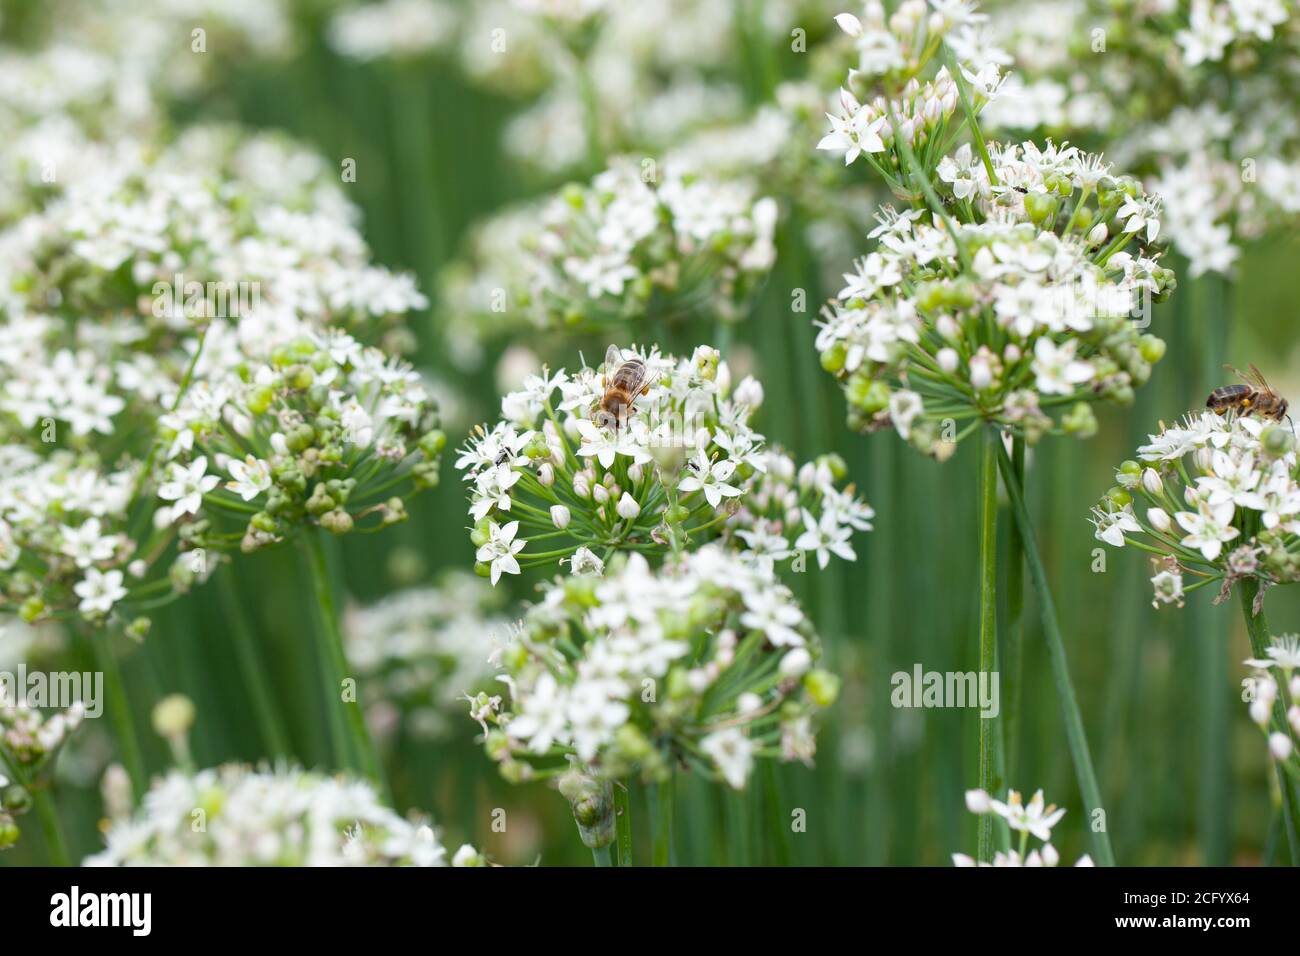 High resolution image of an insect foraging on Himalayan Chinese Chives / Allium tuberosum Stock Photo